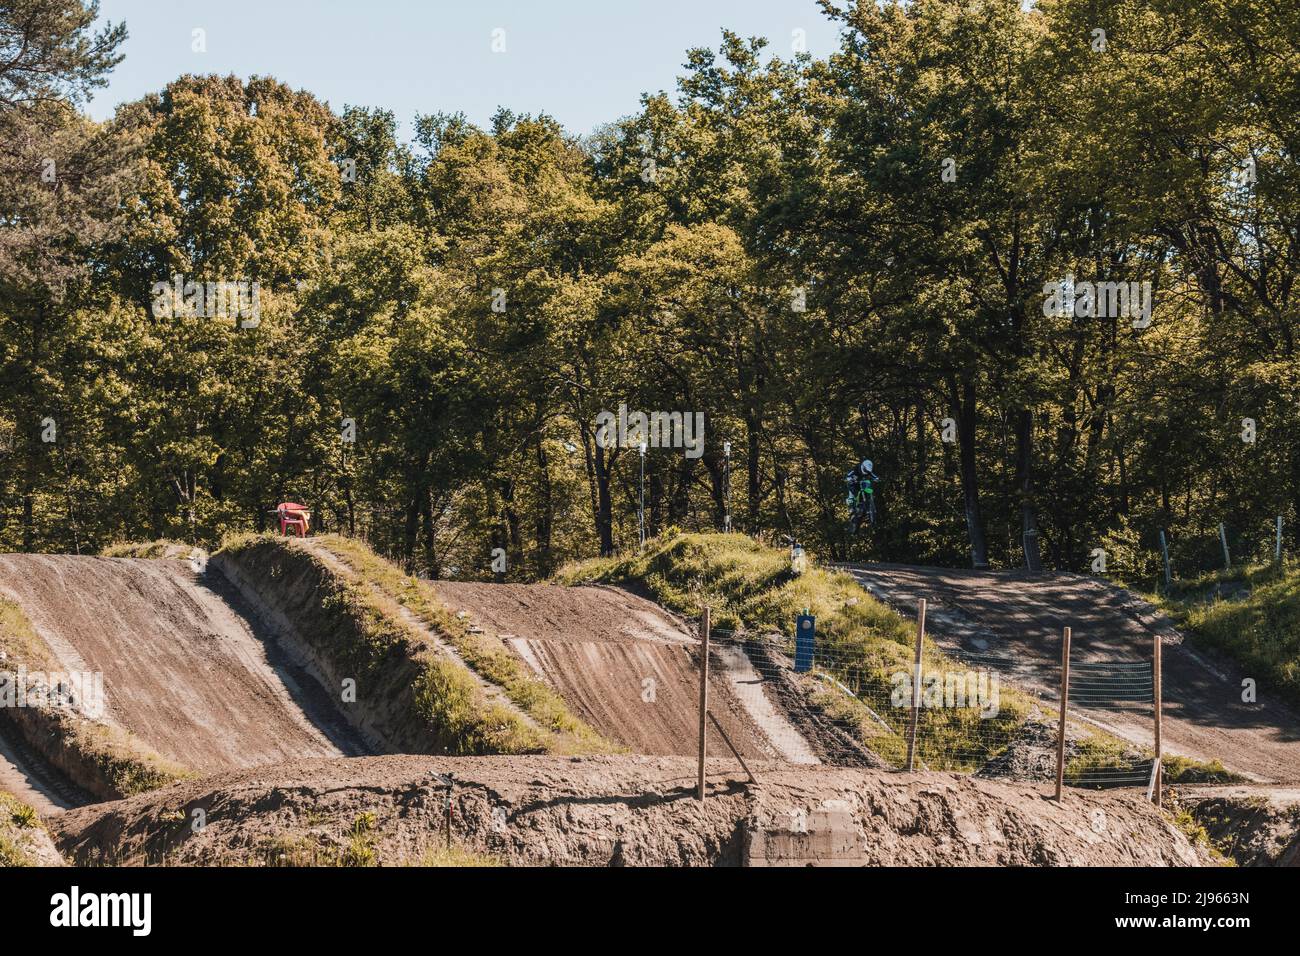 High angle view of a motocross track. On the right side of the track a biker is jumping. Copy space. Concept of motocross, extreme sports. Stock Photo